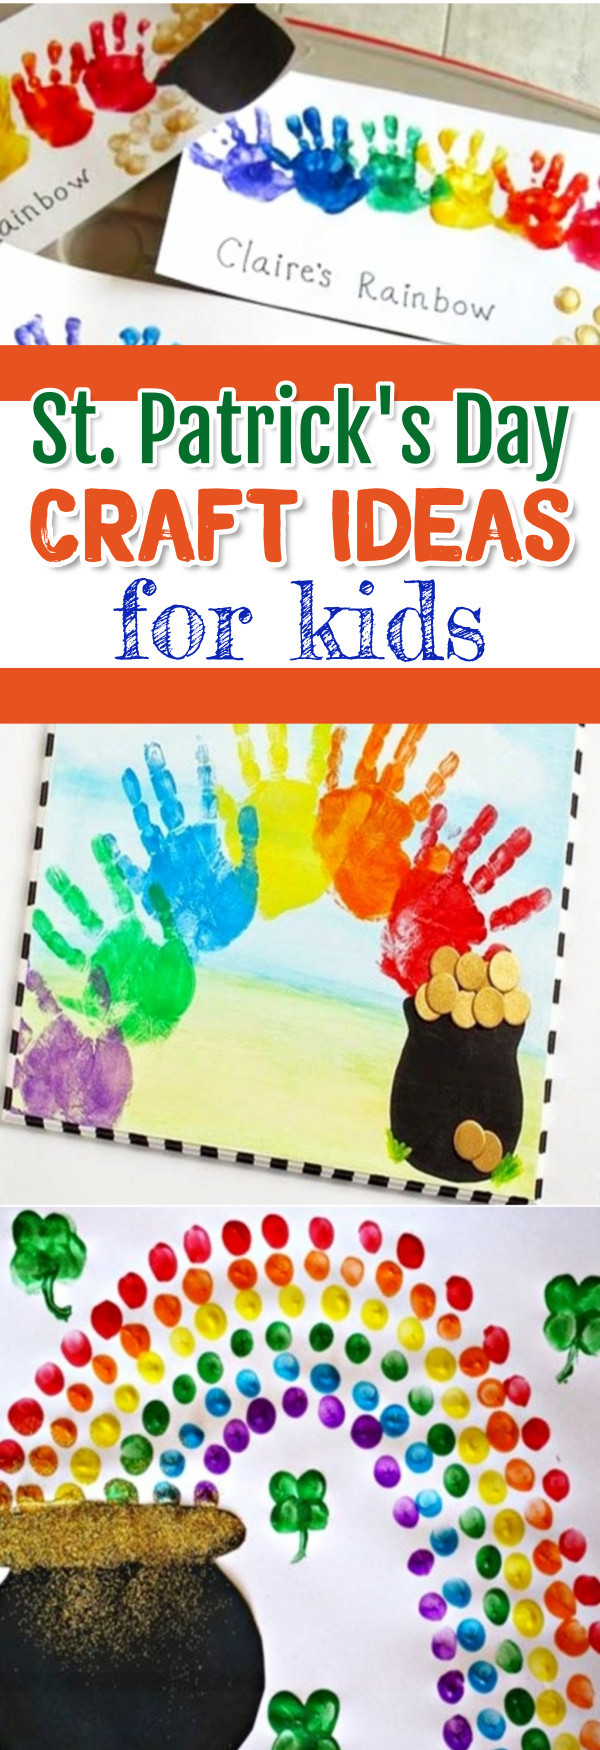 St Patrick's Day Activities For Toddlers
 35 St Patrick s Day Crafts For Kids Easy St Paddy s Day